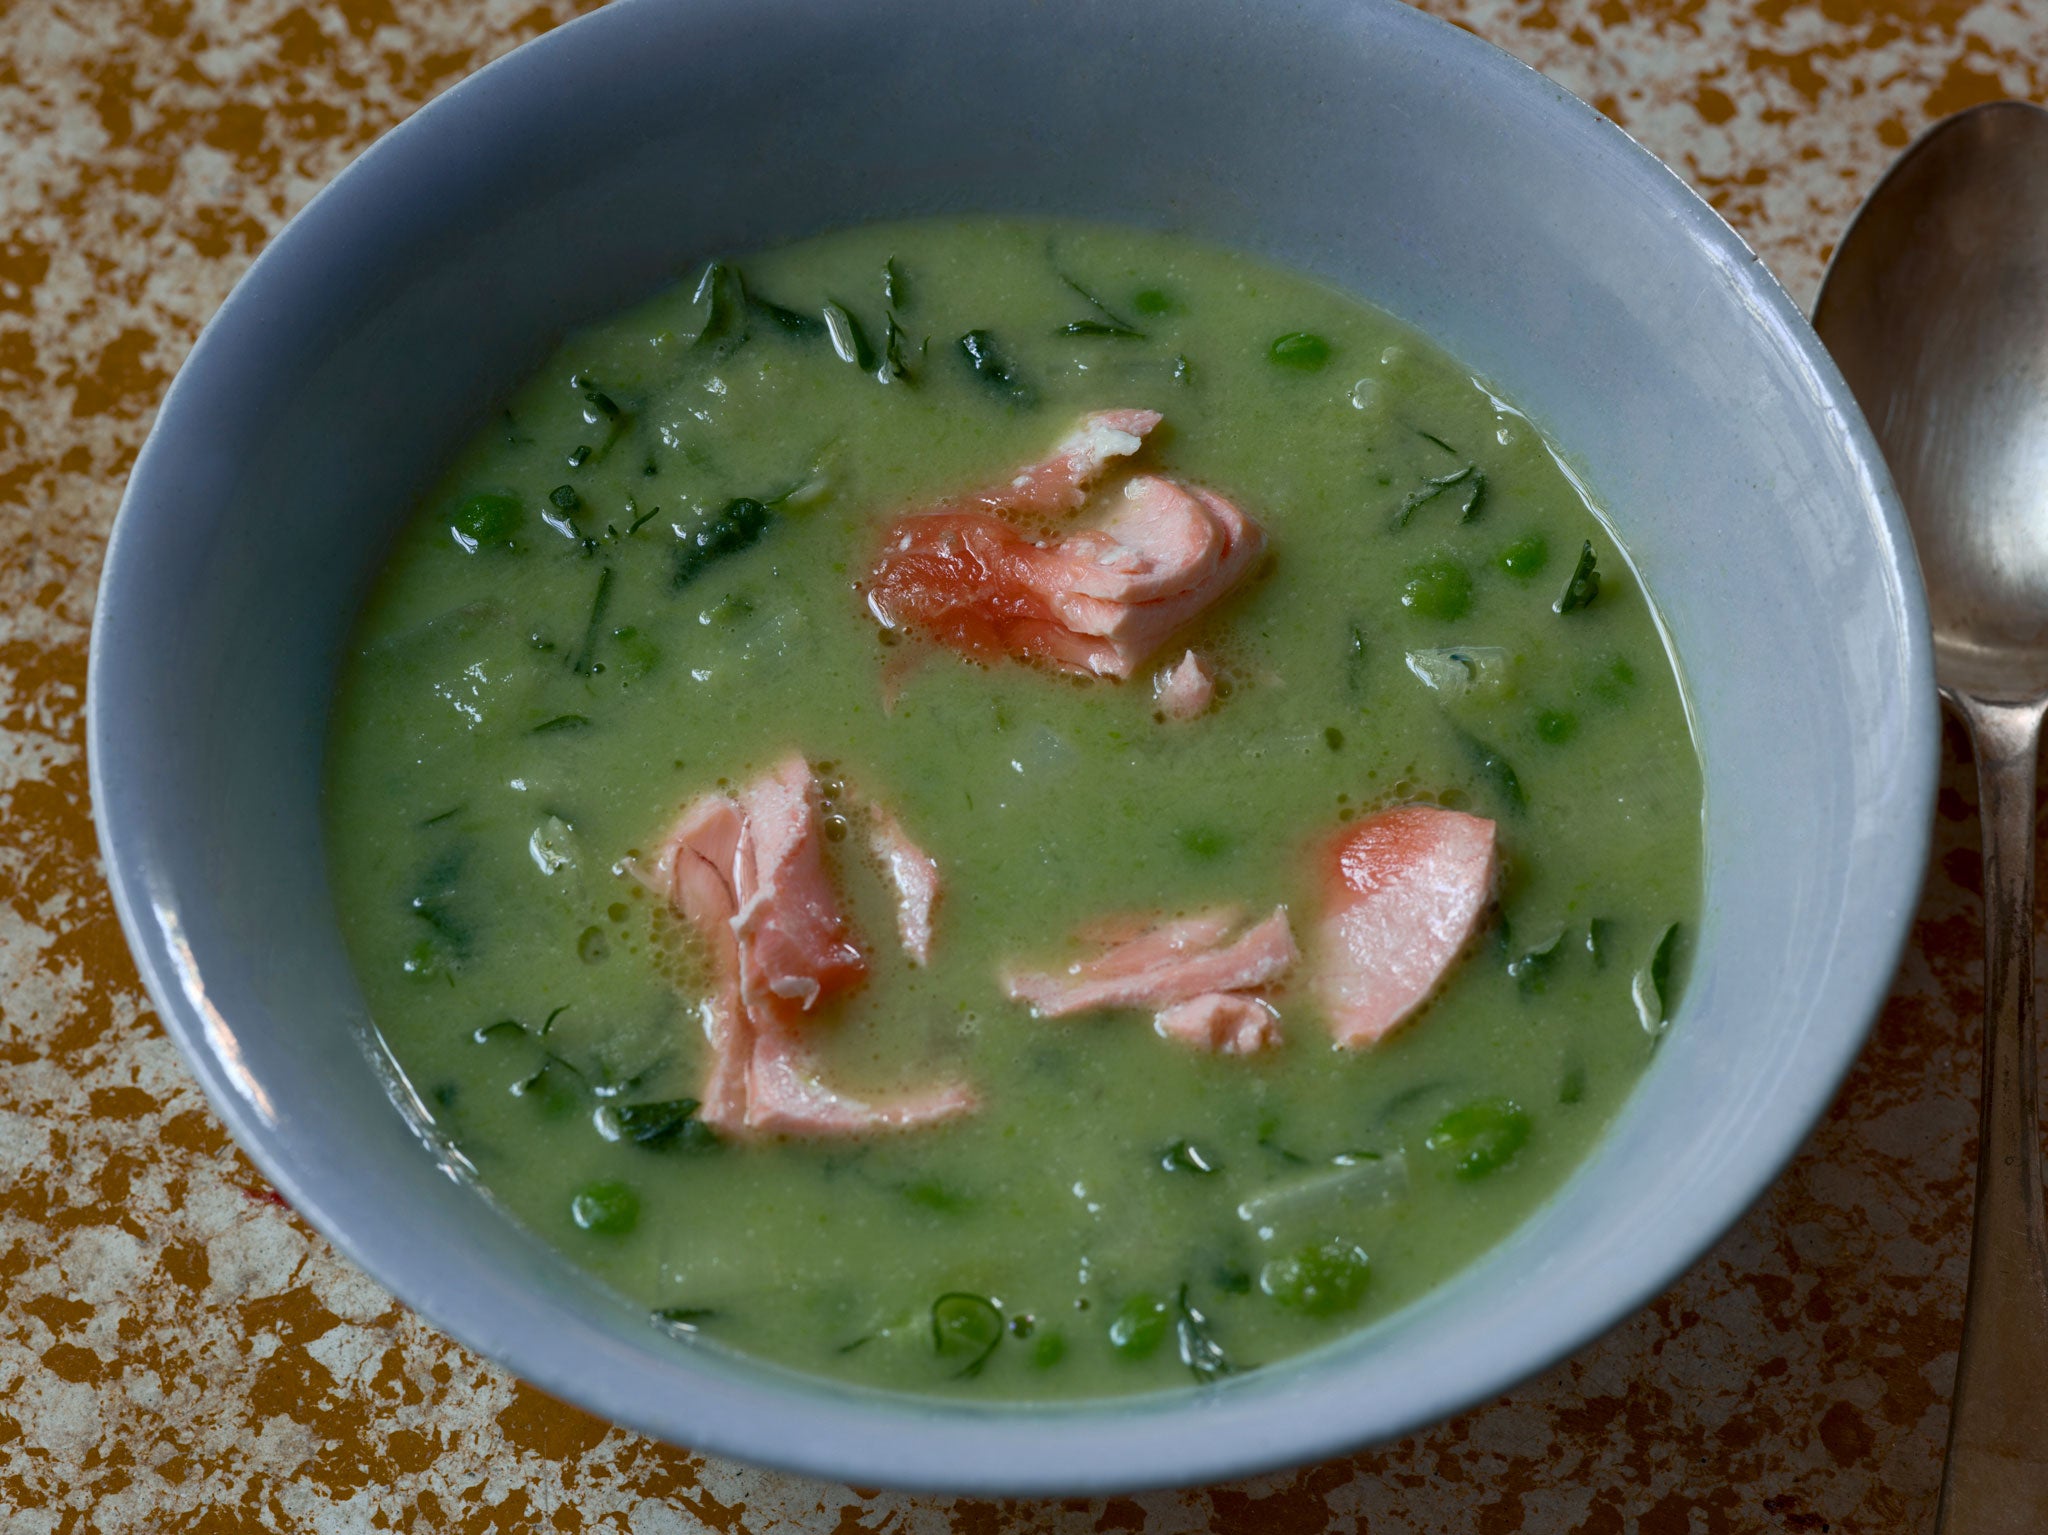 Salmon tails are perfect for Mark's salmon and pea broth